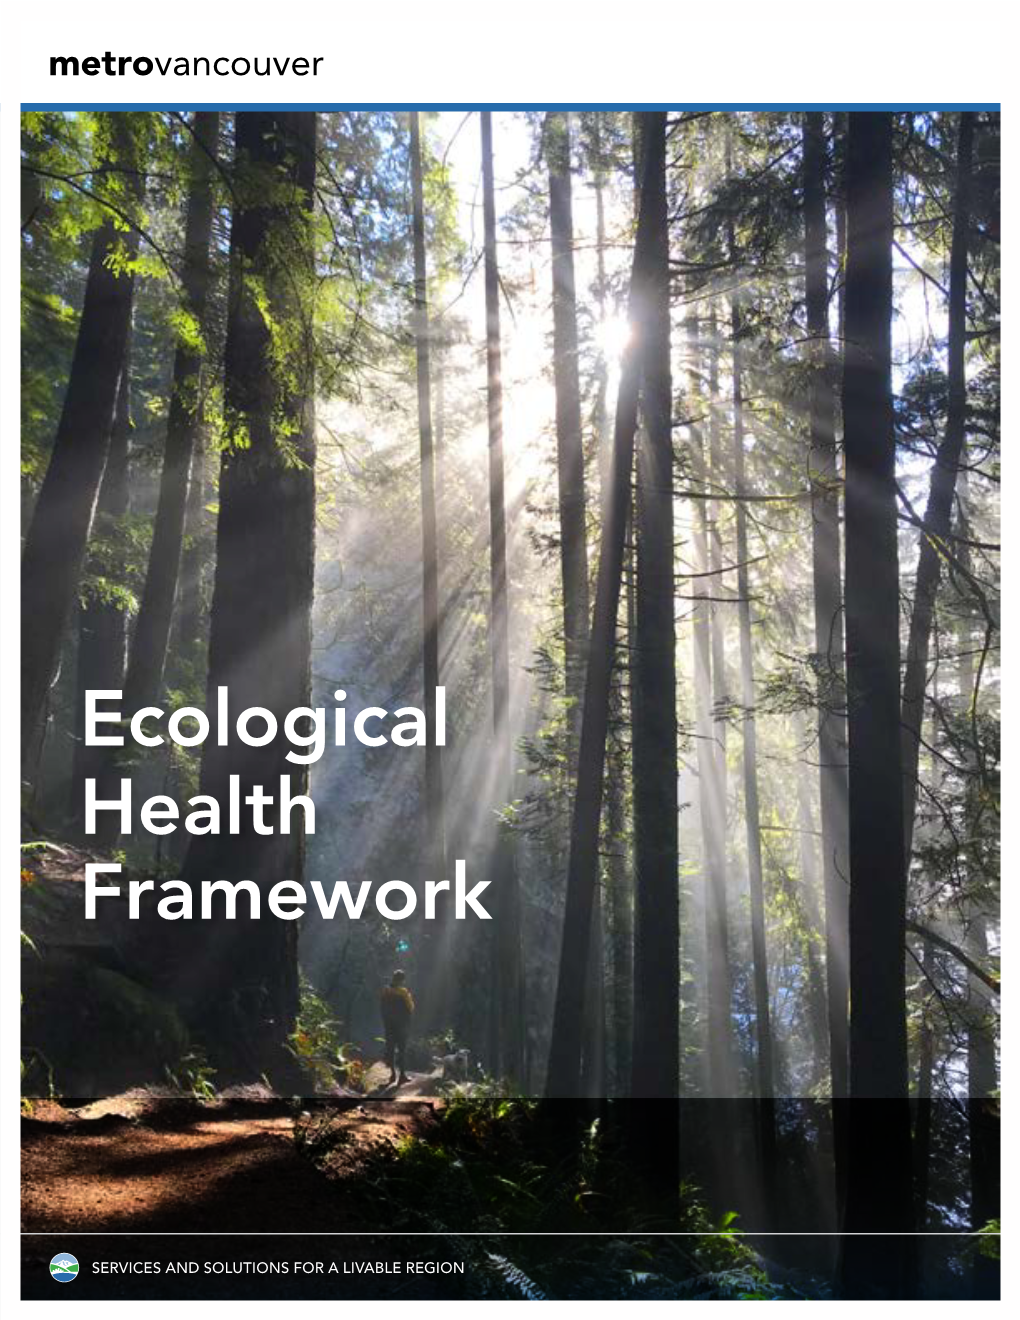 Ecological Health Framework Adopted by the Metro Vancouver Regional District Board on October 26, 2018